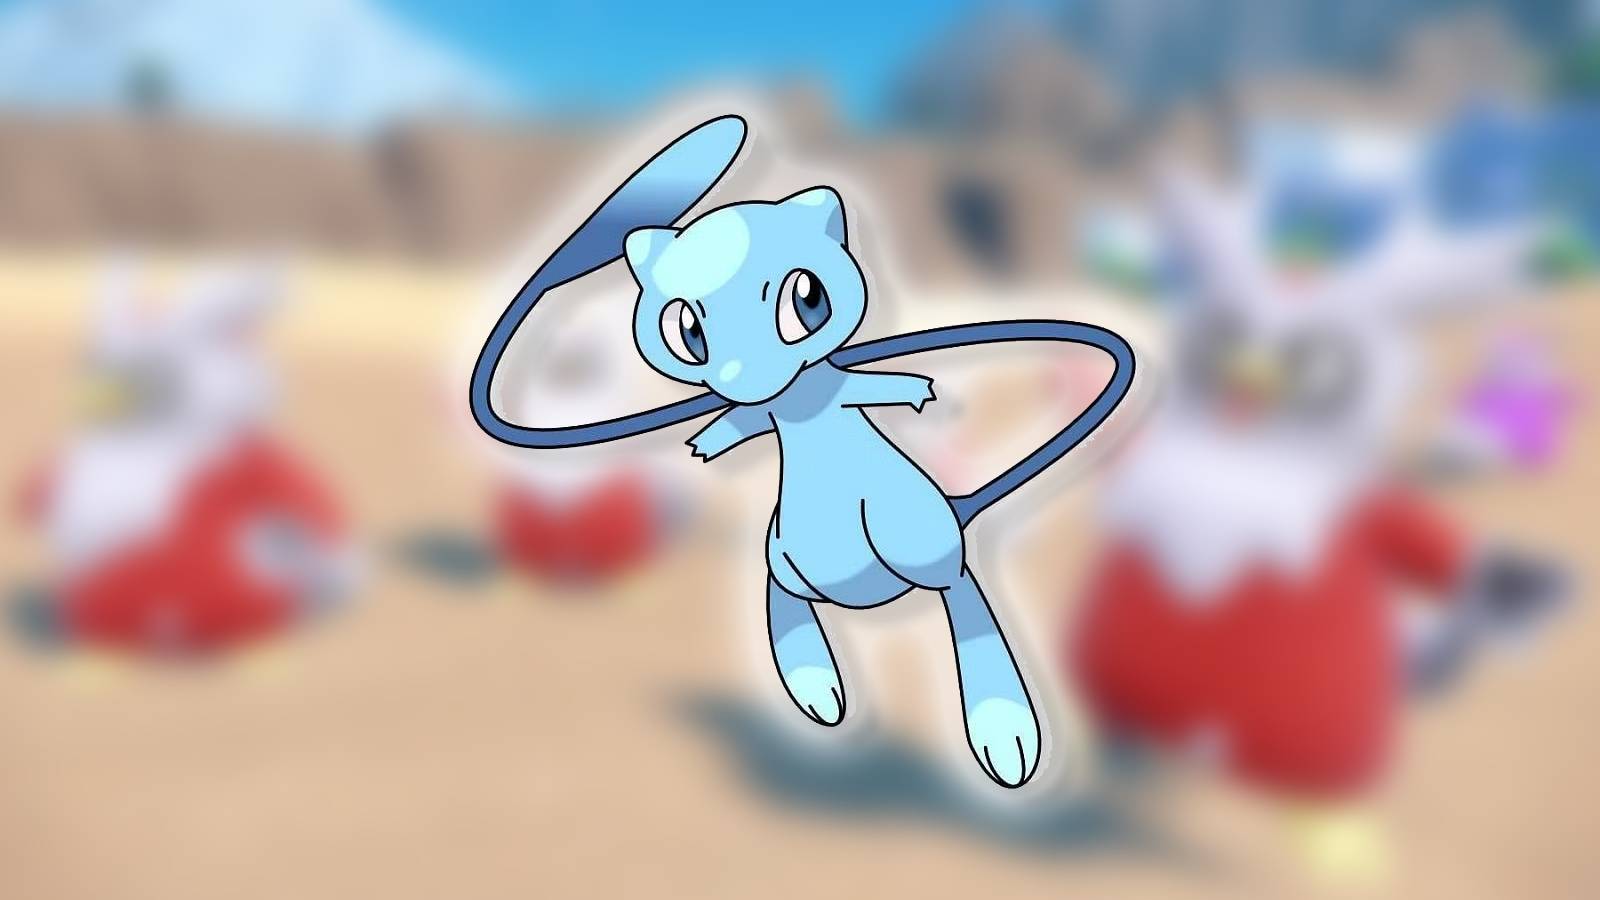 A shiny version of the pokemon mew appears in front of a blurred background